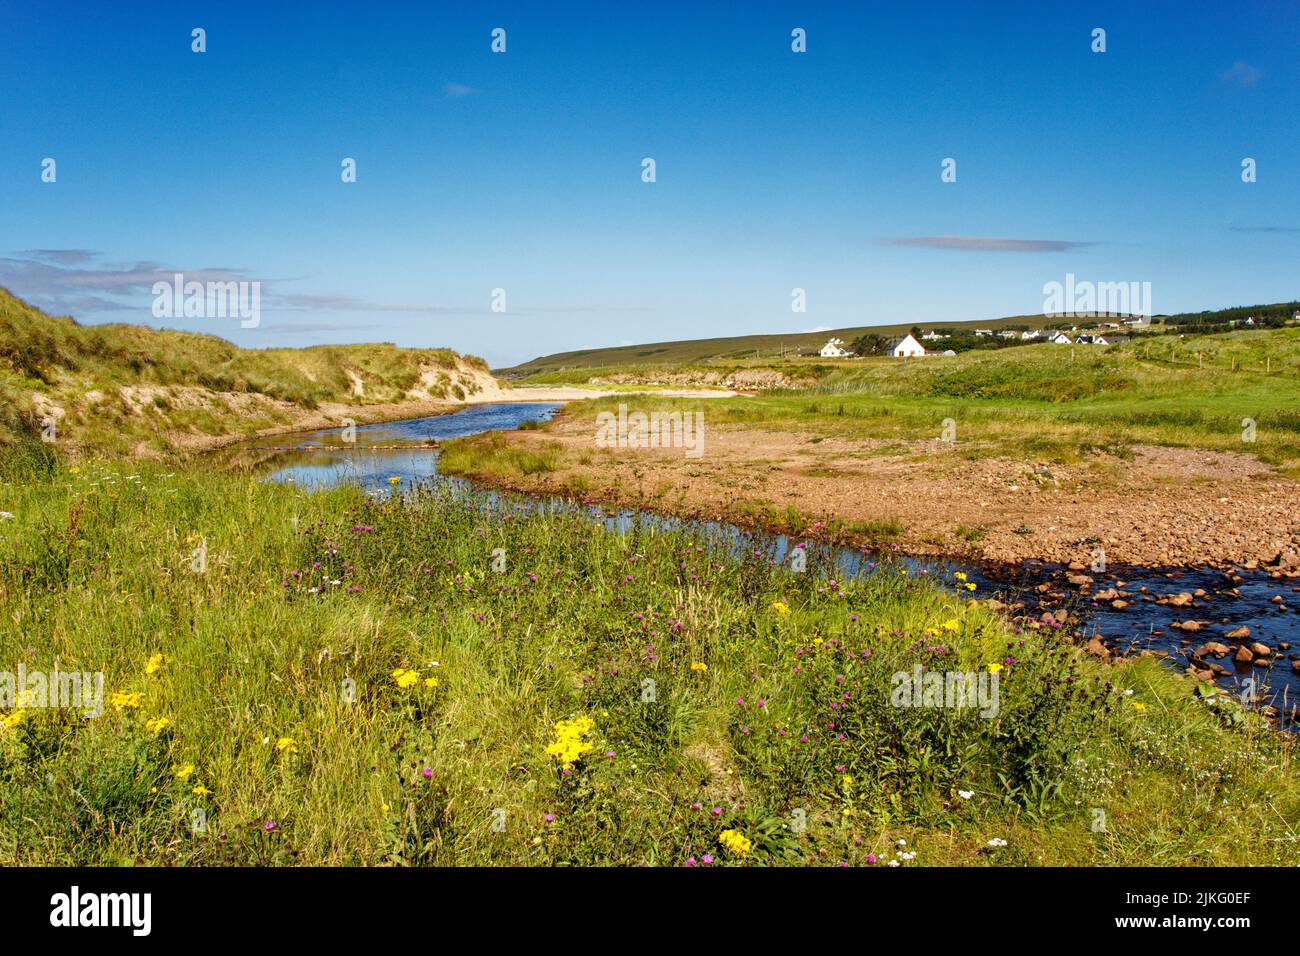 BIG SAND BEACH GAIRLOCH SCOTLAND THE RIVER SAND FLOWING PAST FLOWER COVERED DUNES NEAR THE BEACH Stock Photo